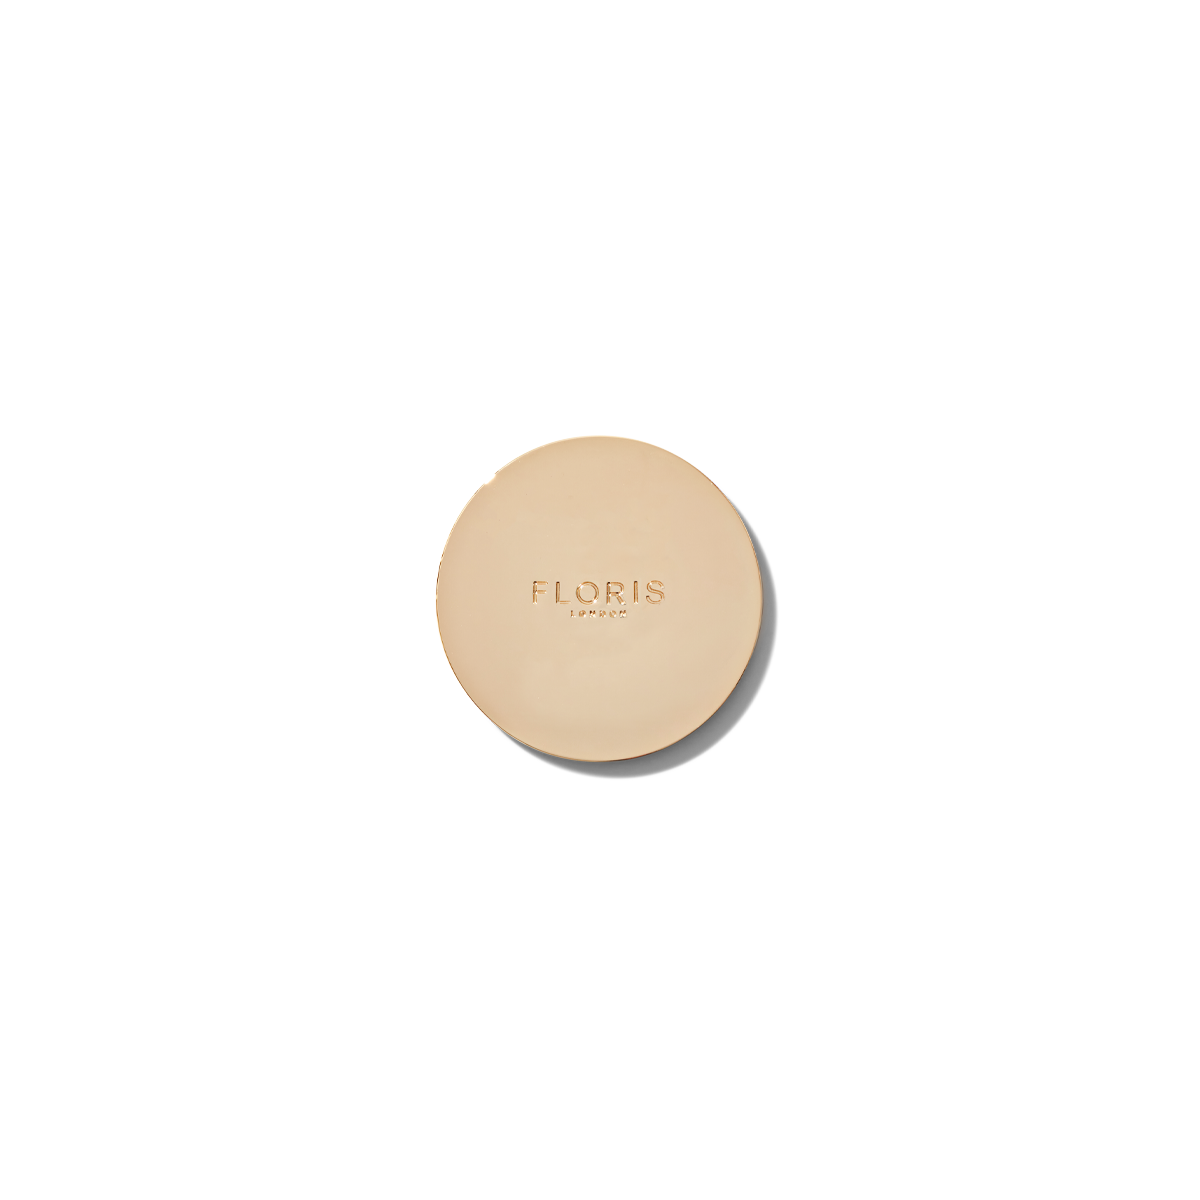 A polished three-wick scented candle from Floris London, featuring the Cinnamon & Tangerine fragrance that captivates the senses.